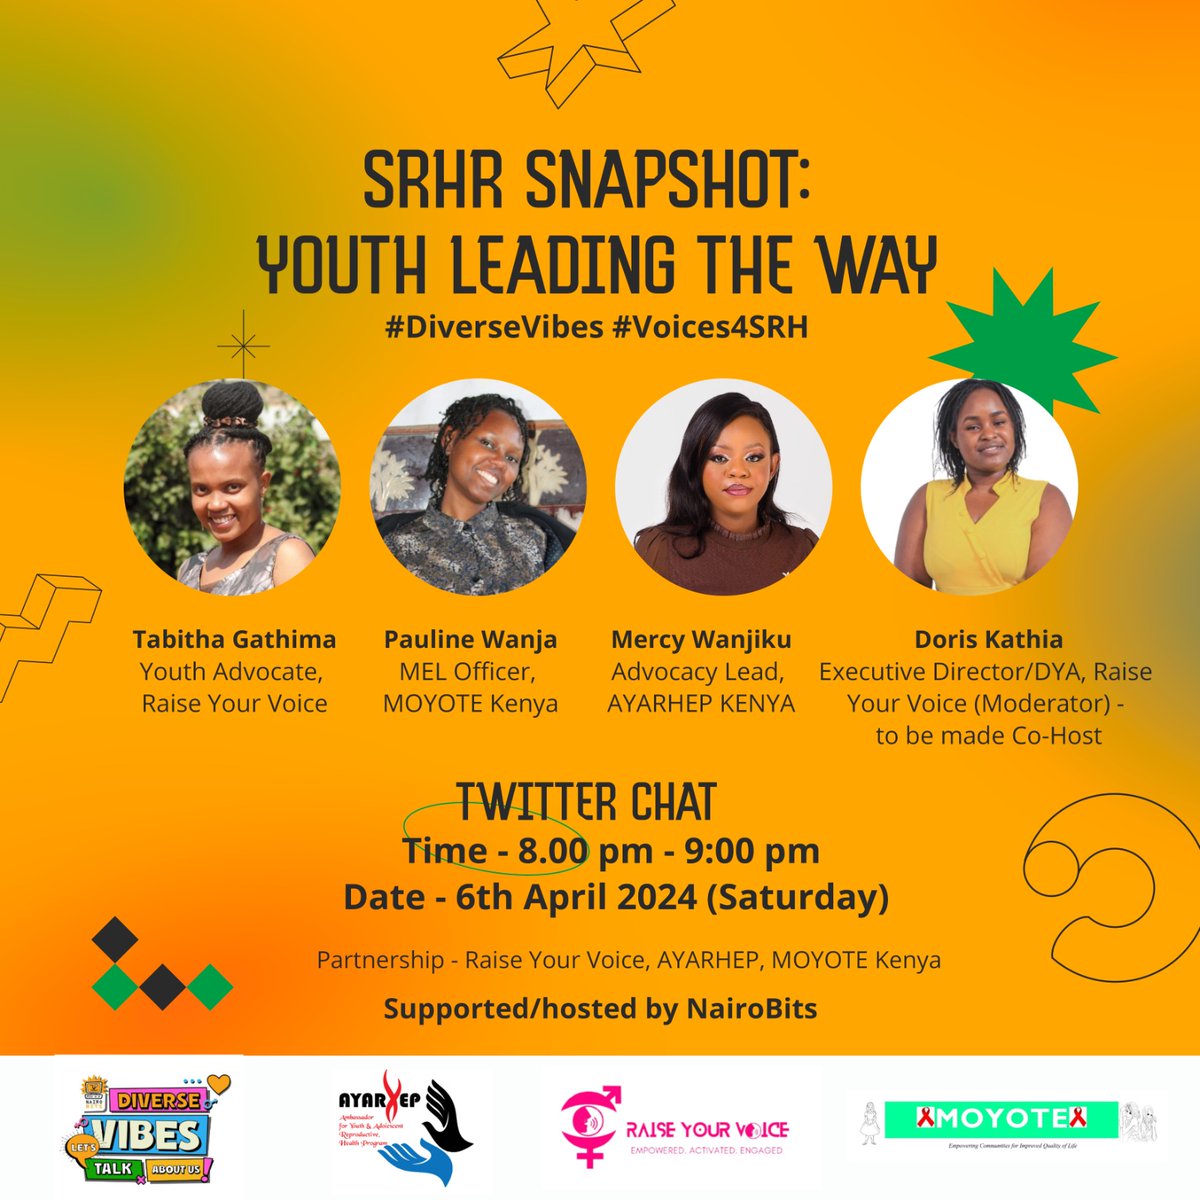 Get ready for an important conversation on Sexual and Reproductive Health (SRH) progress and challenges! Join us tomorrow from 8pm as we discuss recent achievements, emerging trends, and actionable steps to improve SRH outcomes for all. #Voices4SRH #DiverseVibes